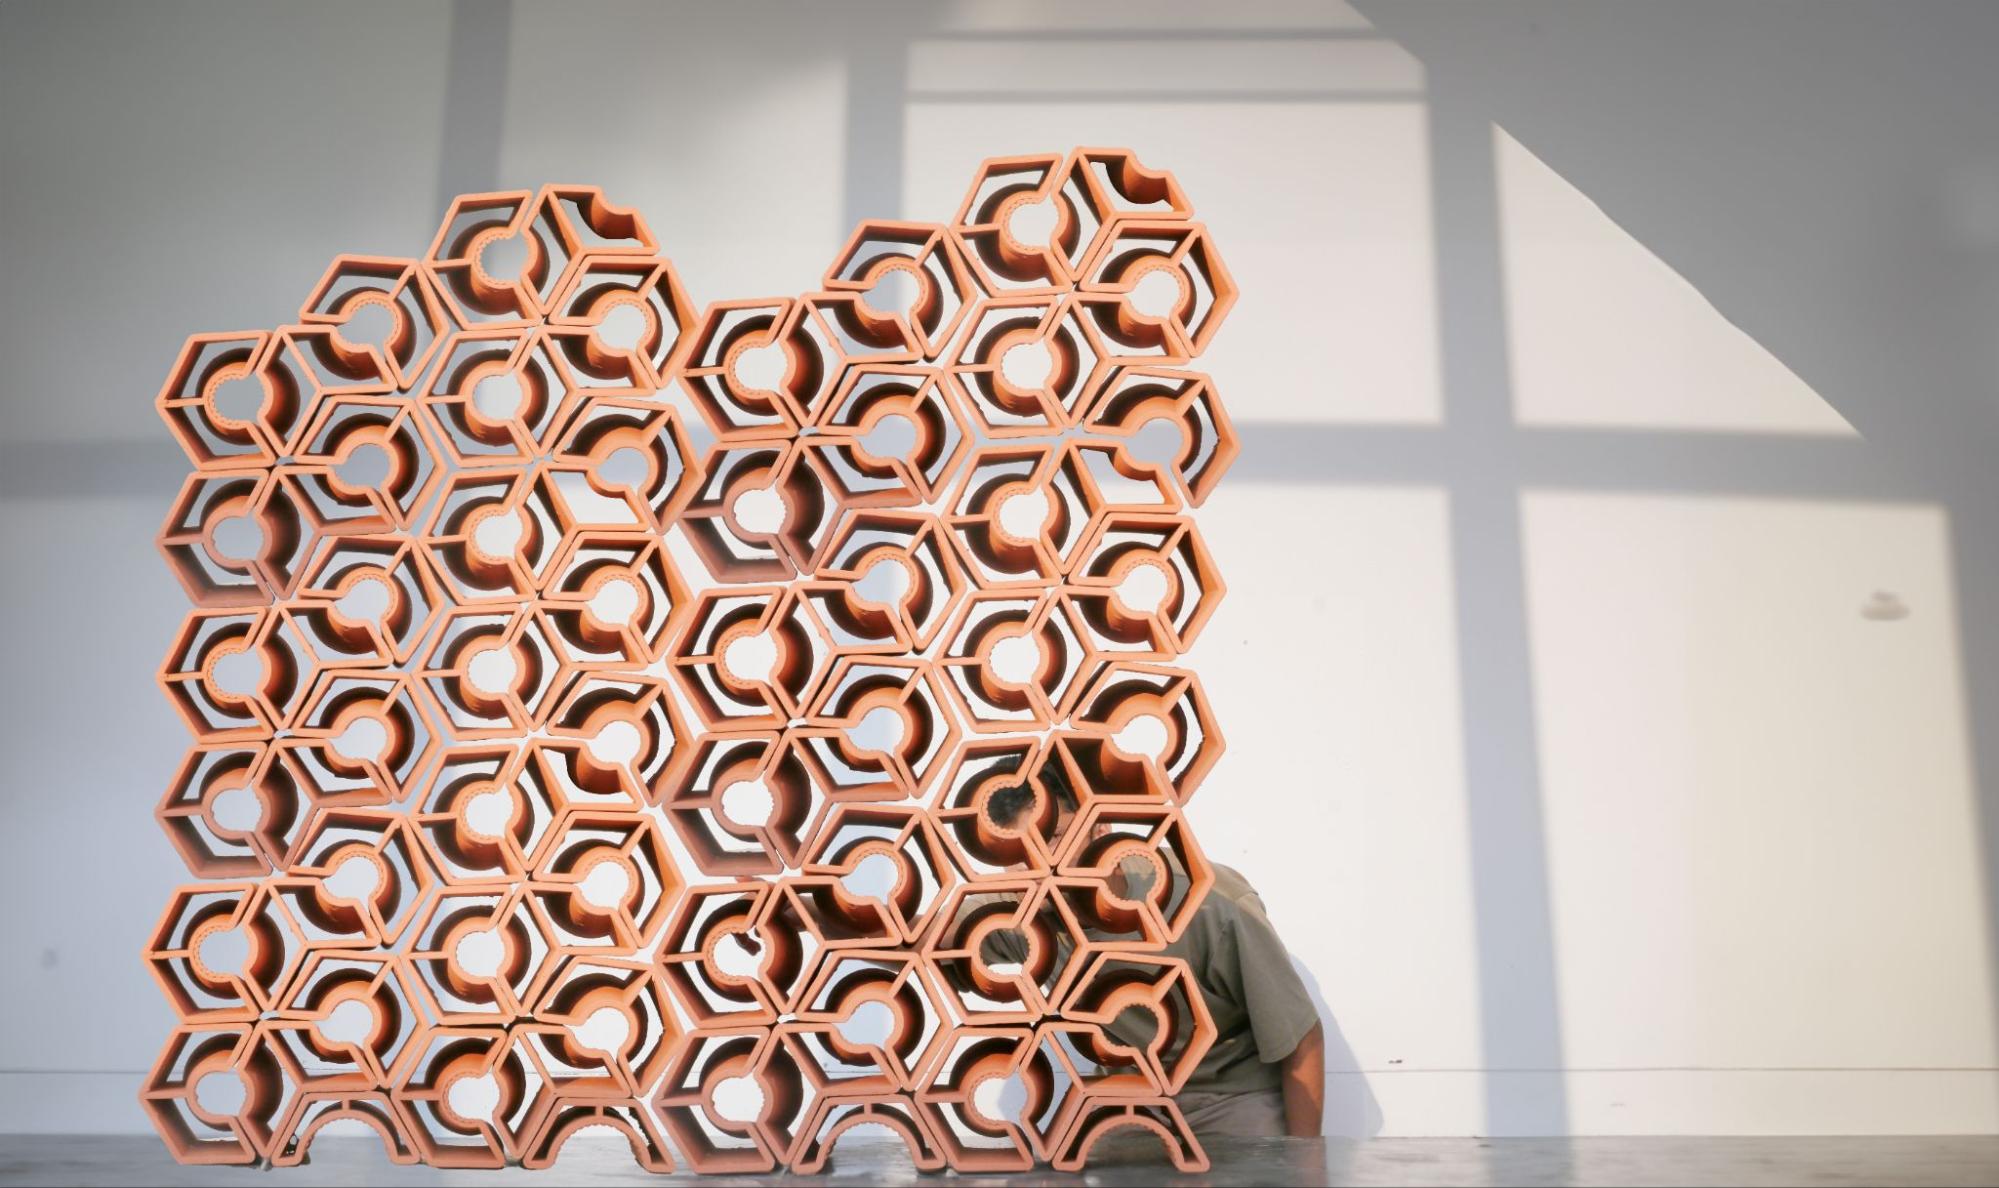 model of structure built in a honeycomb formation in foreground, student against wall looking at model in background